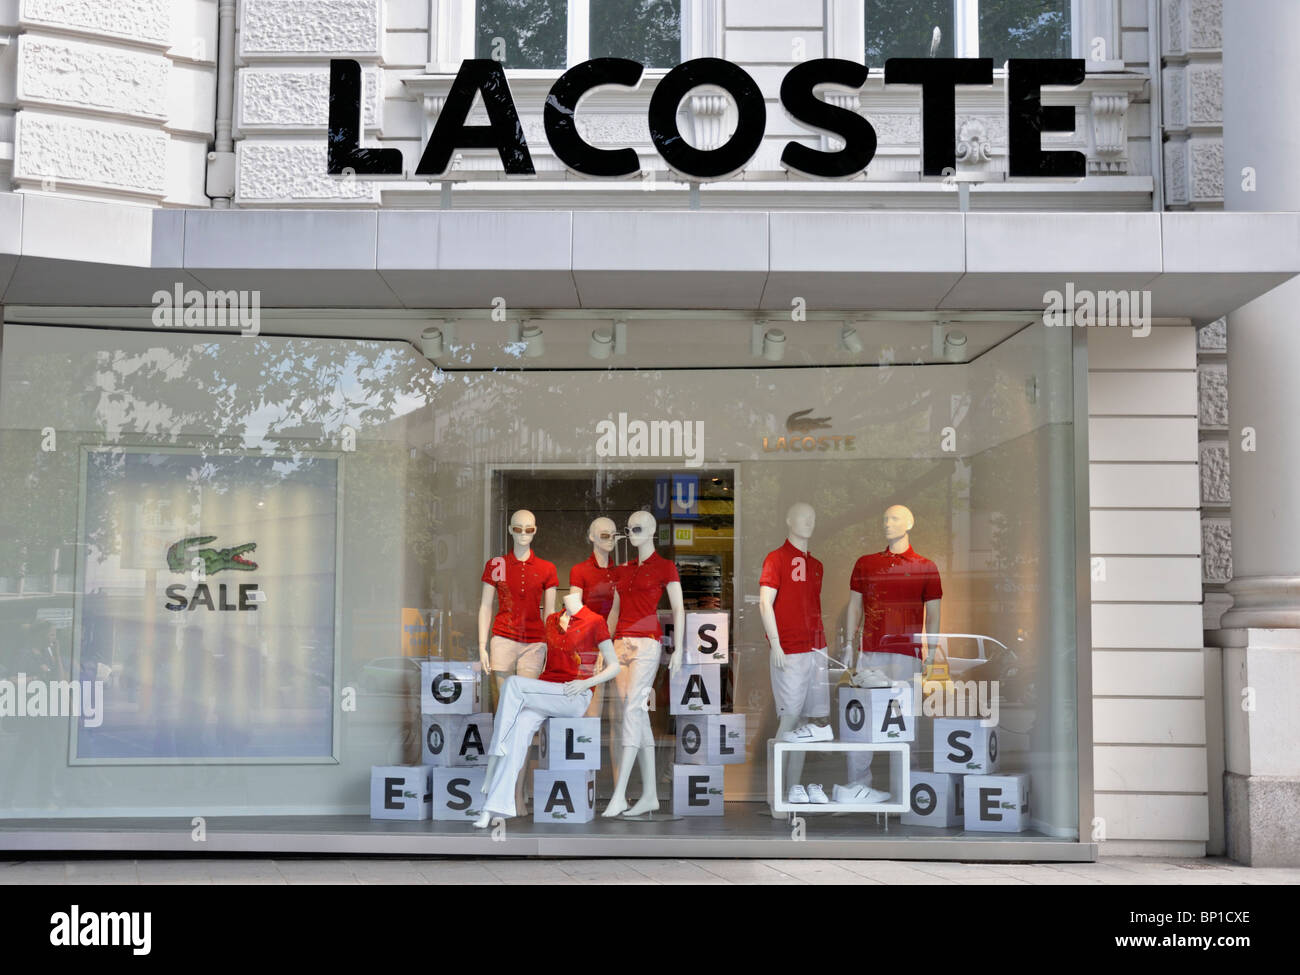 Lacoste clothing store display with sale signs showing sales 2010 Kurfurstendamm Berlin Germany Stock Photo - Alamy